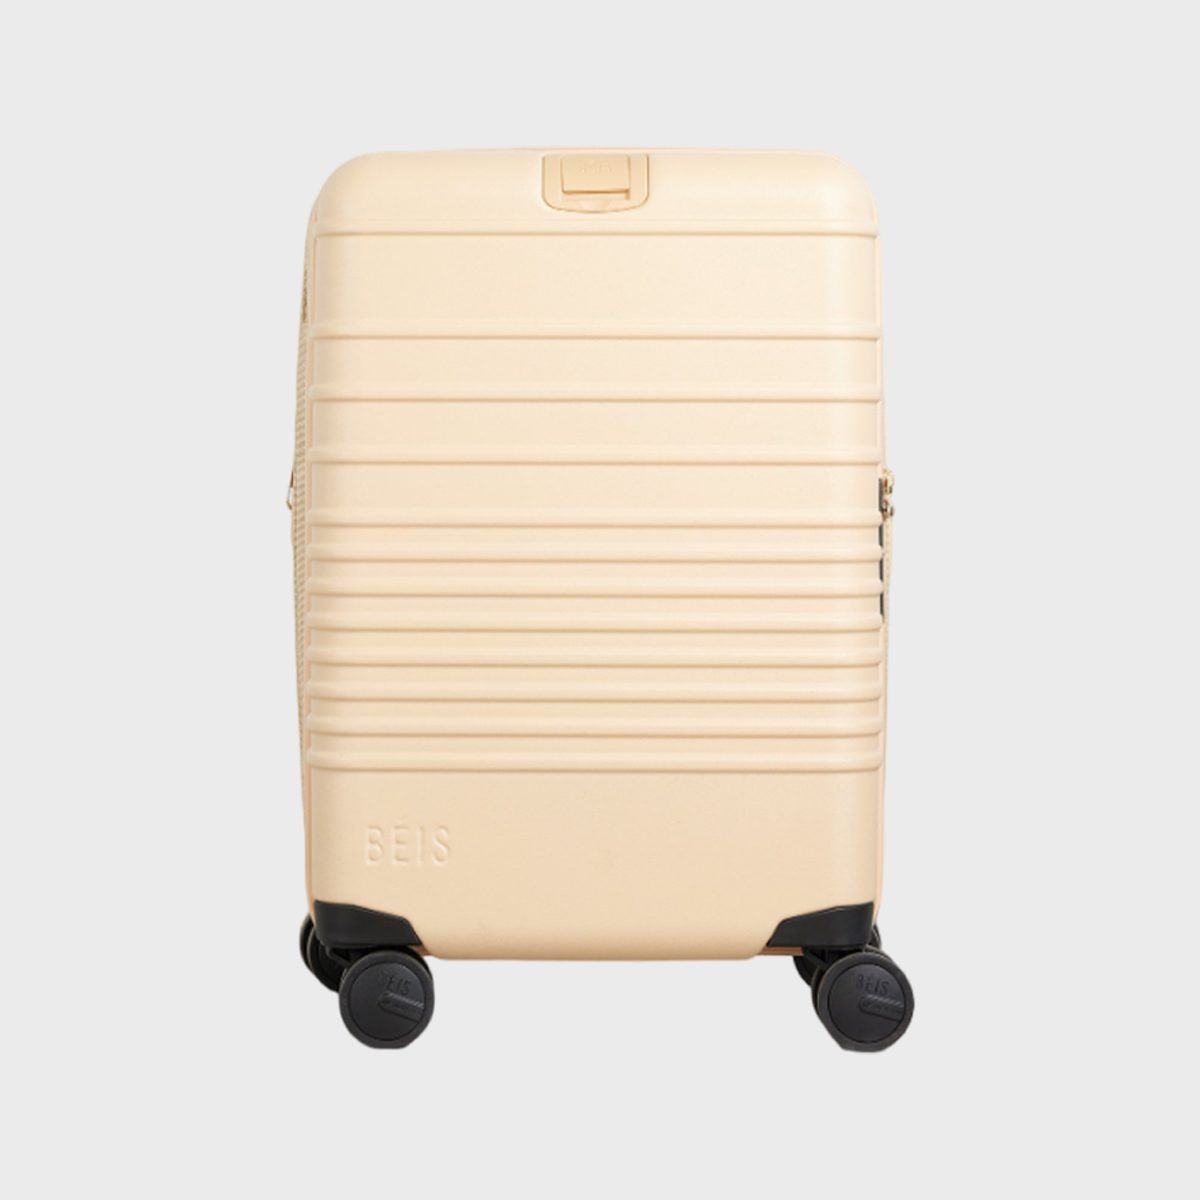 <h3>Beis The Carry-On Roller</h3> <p>The <a href="https://beistravel.com/products/the-carry-on-roller-in-beige" rel="noopener">Beis Carry-On Roller</a> effortlessly combines style and functionality with its expandable design and built-in scale, making it an ideal choice for those who tend to <a href="https://www.rd.com/list/10-ways-to-pack-lighter-when-you-travel/">over-pack</a>. The scale allows you to weigh your luggage in advance, ensuring you avoid any hefty <a href="https://www.rd.com/article/why-more-airlines-are-starting-to-charge-for-carry-on-bags/" rel="noopener noreferrer">baggage fees</a>. Meanwhile, the expandable design adds an additional two inches of packing space, allowing you to fit in more essentials. This best carry-on luggage pick also includes various pouches, perfect for organizing shoes, laundry and personal items.</p> <p>"I bought this specifically for a 10-day trip to Japan that I wanted to do with just carry-ons and this was absolutely perfect!" writes verified buyer Grace C. "The expander was great for extra storage as I stocked up on souvenirs. I got a ton of compliments and looks at the airport and it was really nice to be easy to spot by my travel mates."</p> <p><strong>Pros</strong></p> <ul> <li>Built-in scale helps you avoid overweight fees</li> <li>Expandable design lets you pack more</li> <li>Lifetime warranty</li> <li>TSA-approved lock</li> <li>Water-resistant zipper tape</li> <li>Nine fun color options</li> </ul> <p><strong>Cons</strong></p> <ul> <li>No power bank/battery</li> </ul> <p class="listicle-page__cta-button-shop"><a class="shop-btn" href="https://beistravel.com/products/the-carry-on-roller-in-beige">Shop Now</a></p>